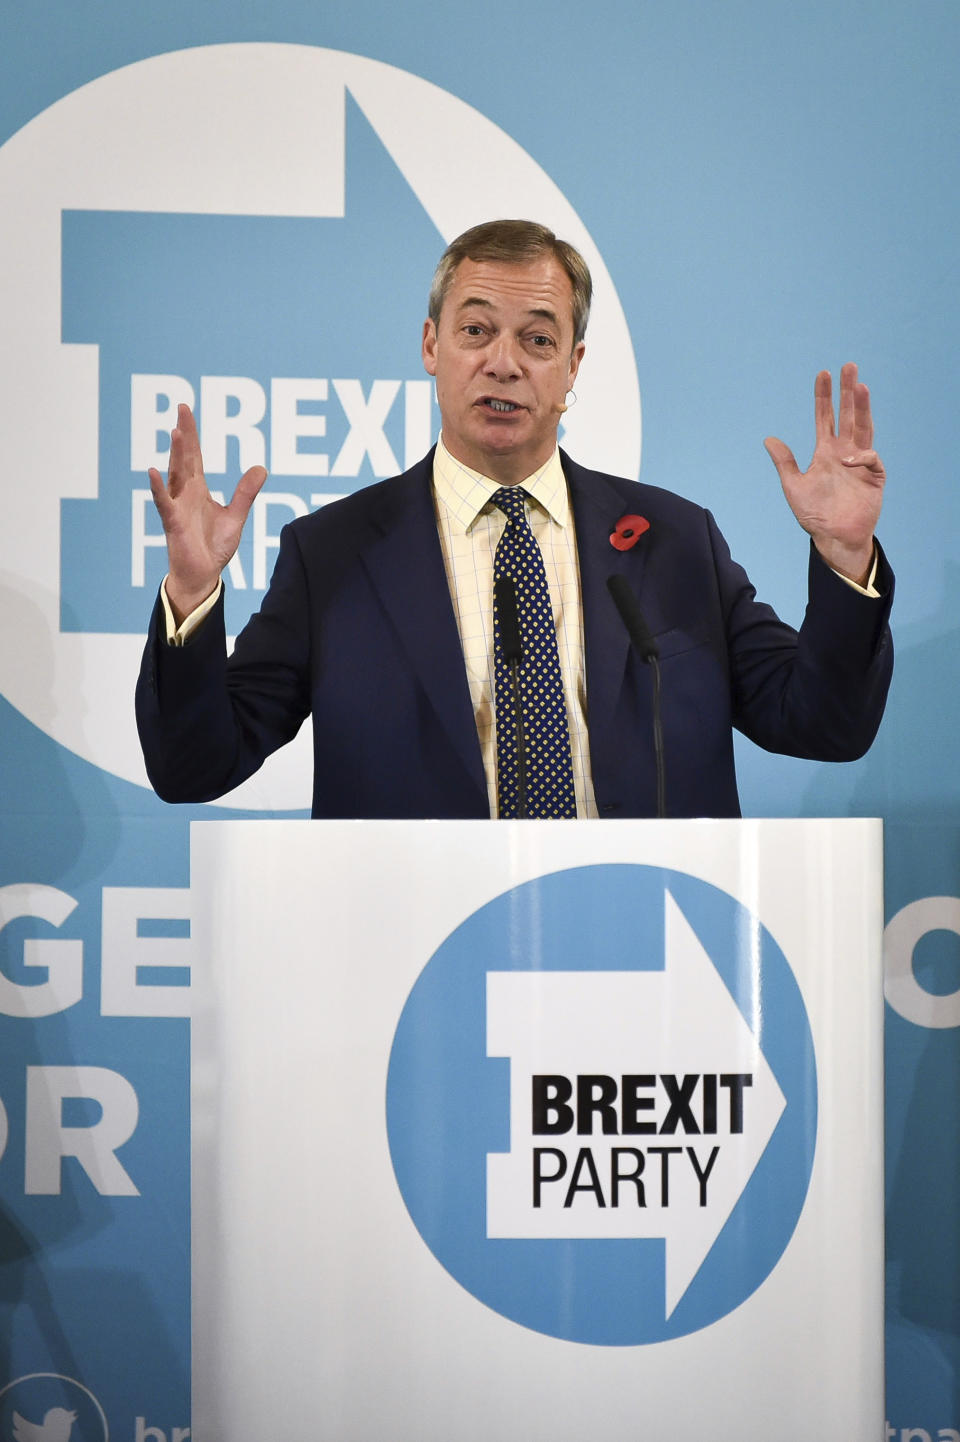 Brexit Party leader Nigel Farage speaks at a campaign rally in Pontypool, Wales, Friday Nov. 8, 2019. Britain's Brexit split with Europe is one of the main issues as the country goes to the polls in a General Election on Dec. 12. (Ben Birchall/PA via AP)